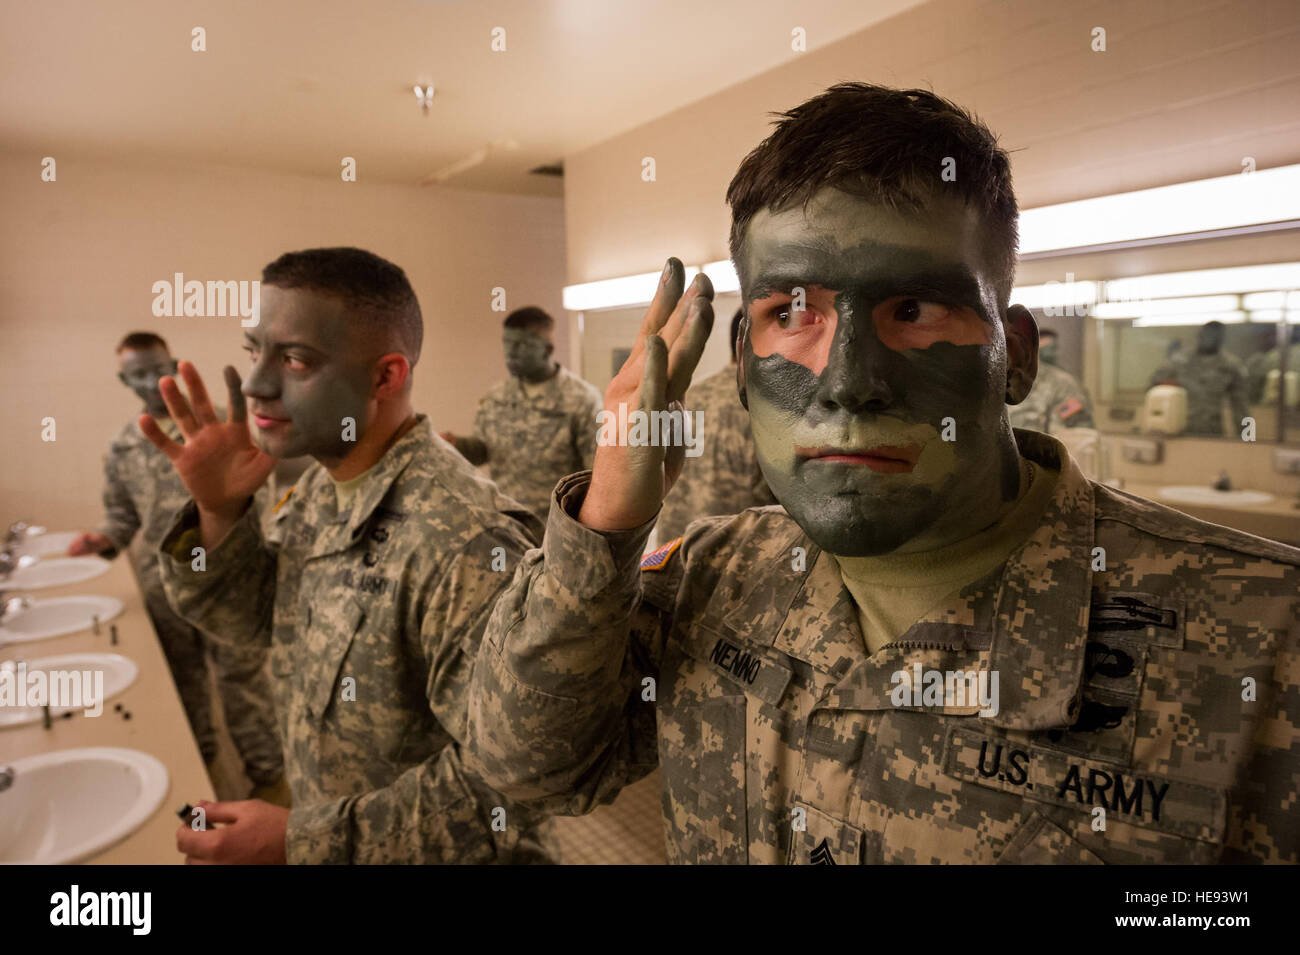 Army Staff Sgts. Benjamin Nenno and Jerome Willis, paratroopers assigned to B Company, 3rd Battalion (Airborne), 509th Infantry Regiment, 4th Brigade Combat Team (Airborne), 25th Infantry Division, U.S. Army Alaska, don camouflage face paint in preparation for a show of force demonstration at Arctic Thunder Open House 2014, July 26, 2014. Arctic Thunder is a biennial event hosted by Joint Base Elmendorf-Richardson, Alaska. Featuring more than 40 Air Force, Army and civilian aerial acts and an expected crowd of more than 200,000 people, it is the largest two-day event in the state and one of th Stock Photo